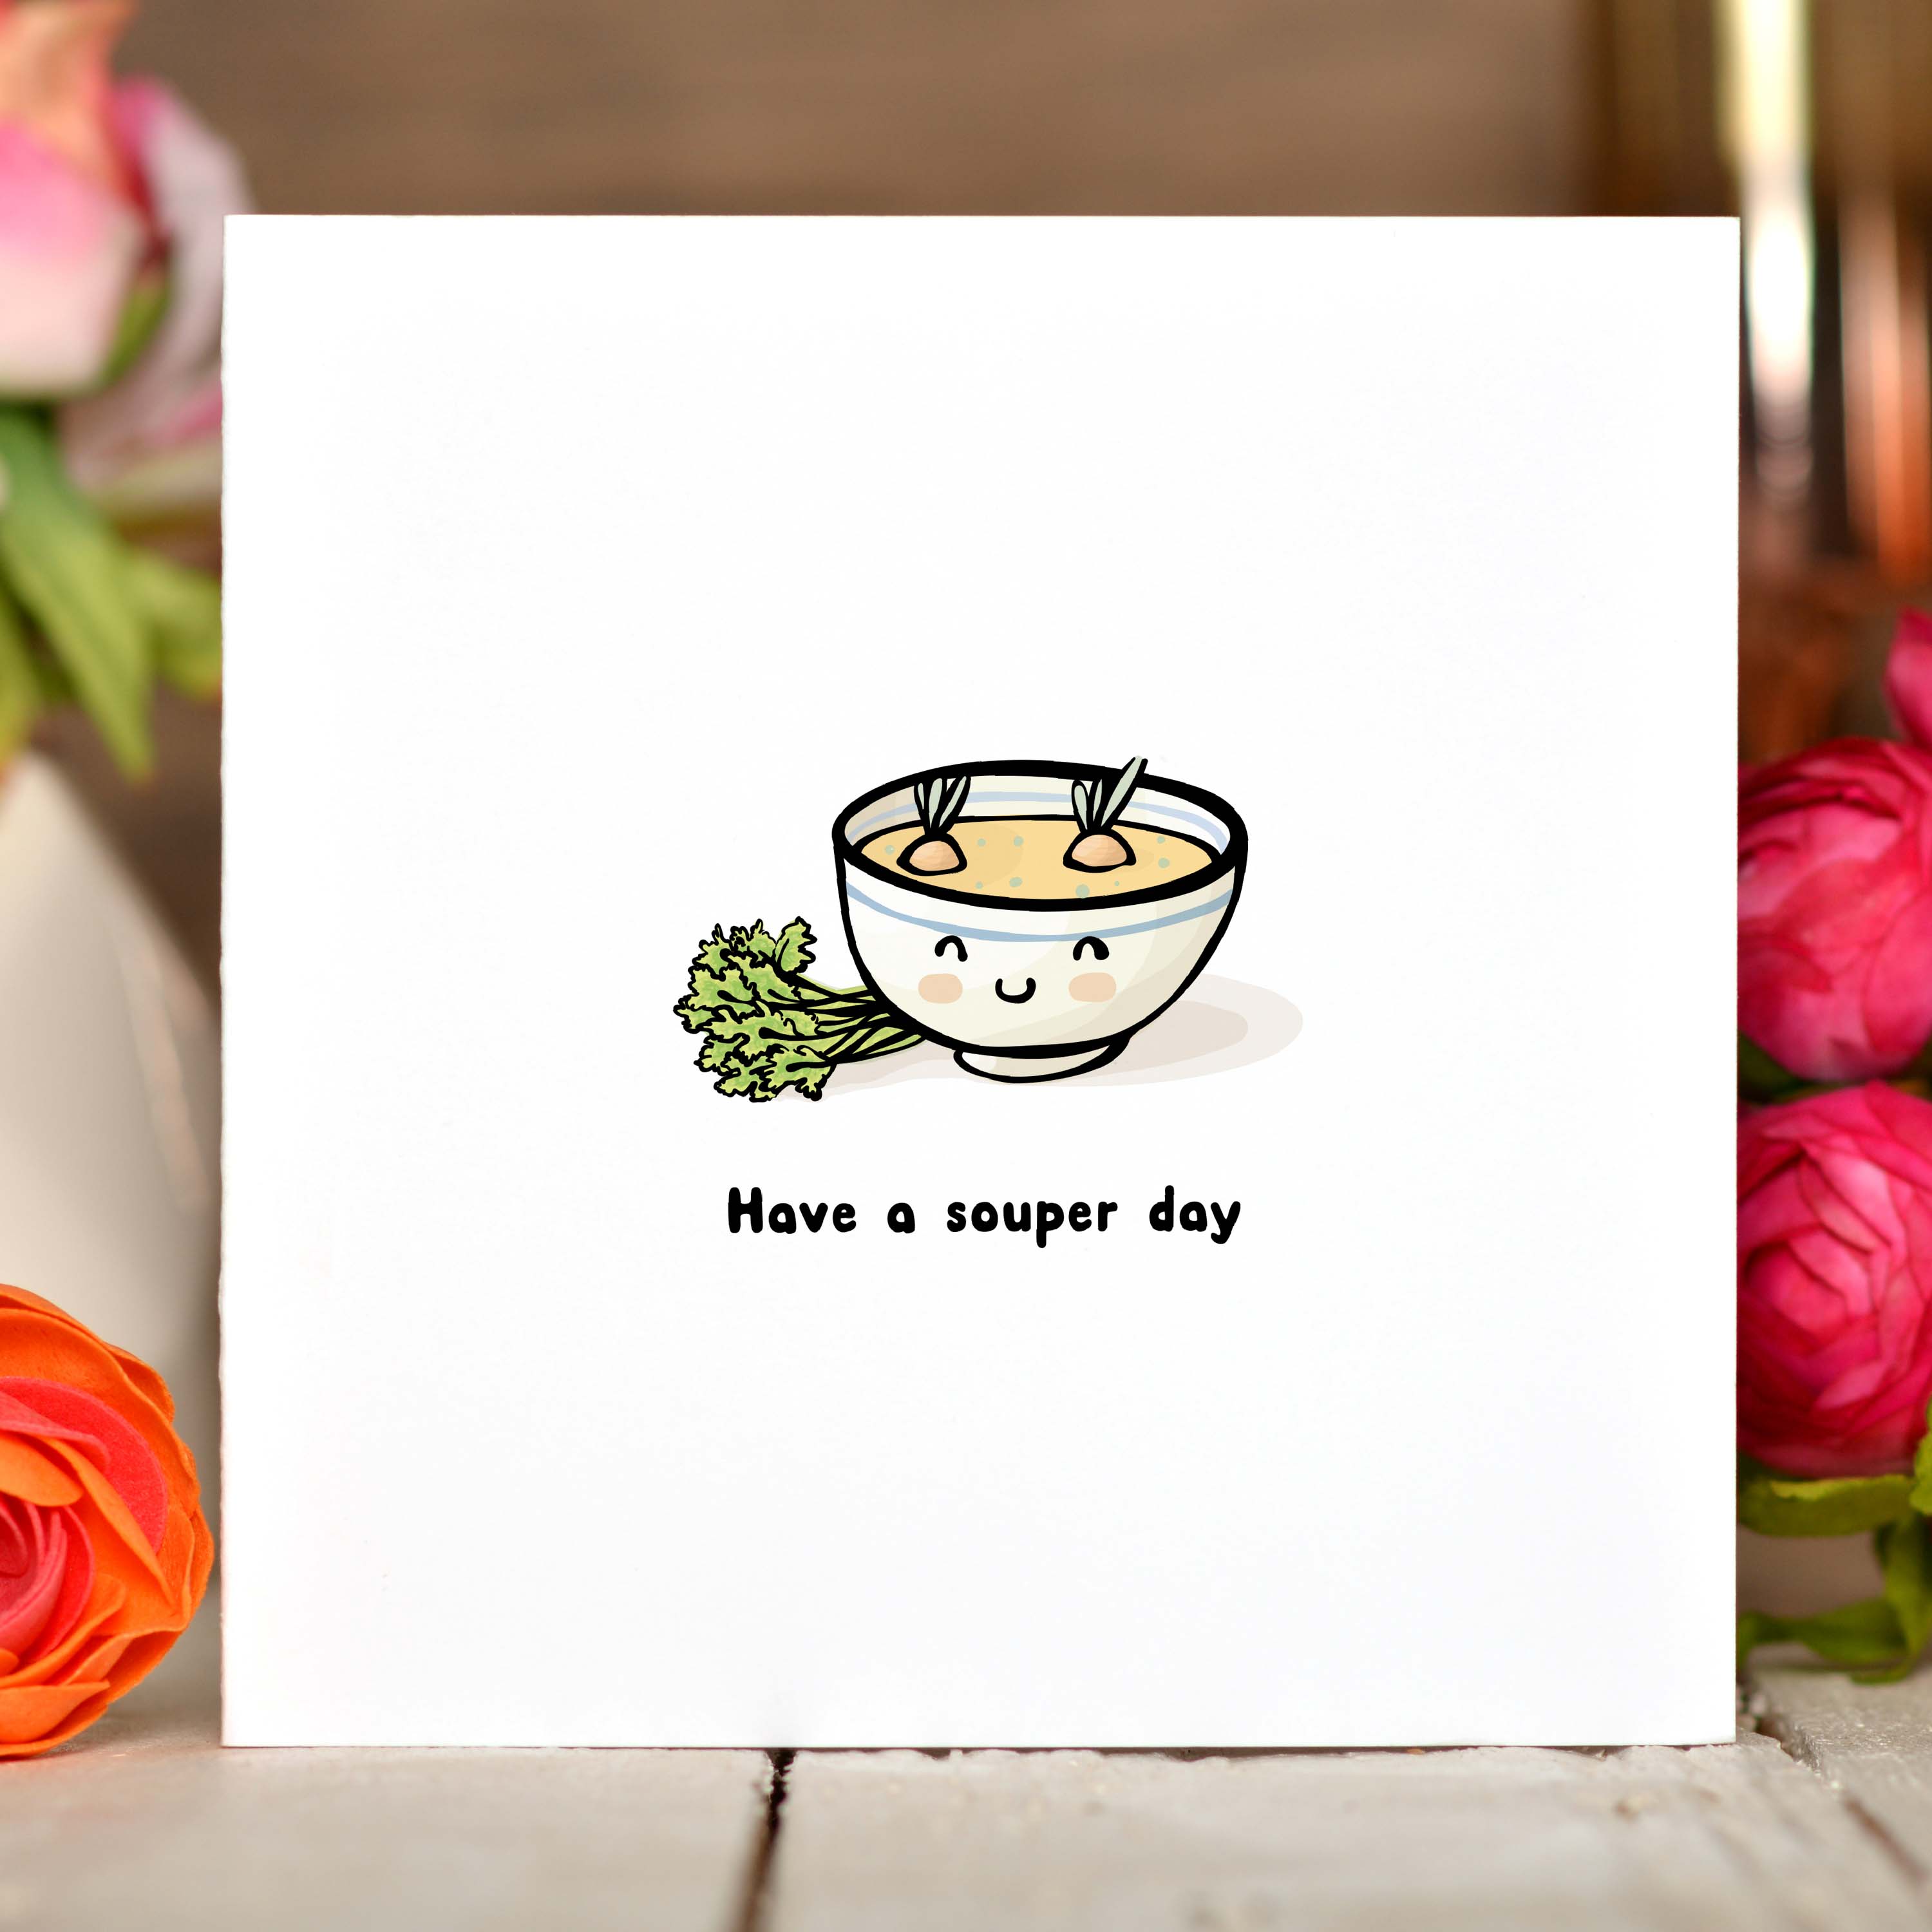 Have a souper day Card